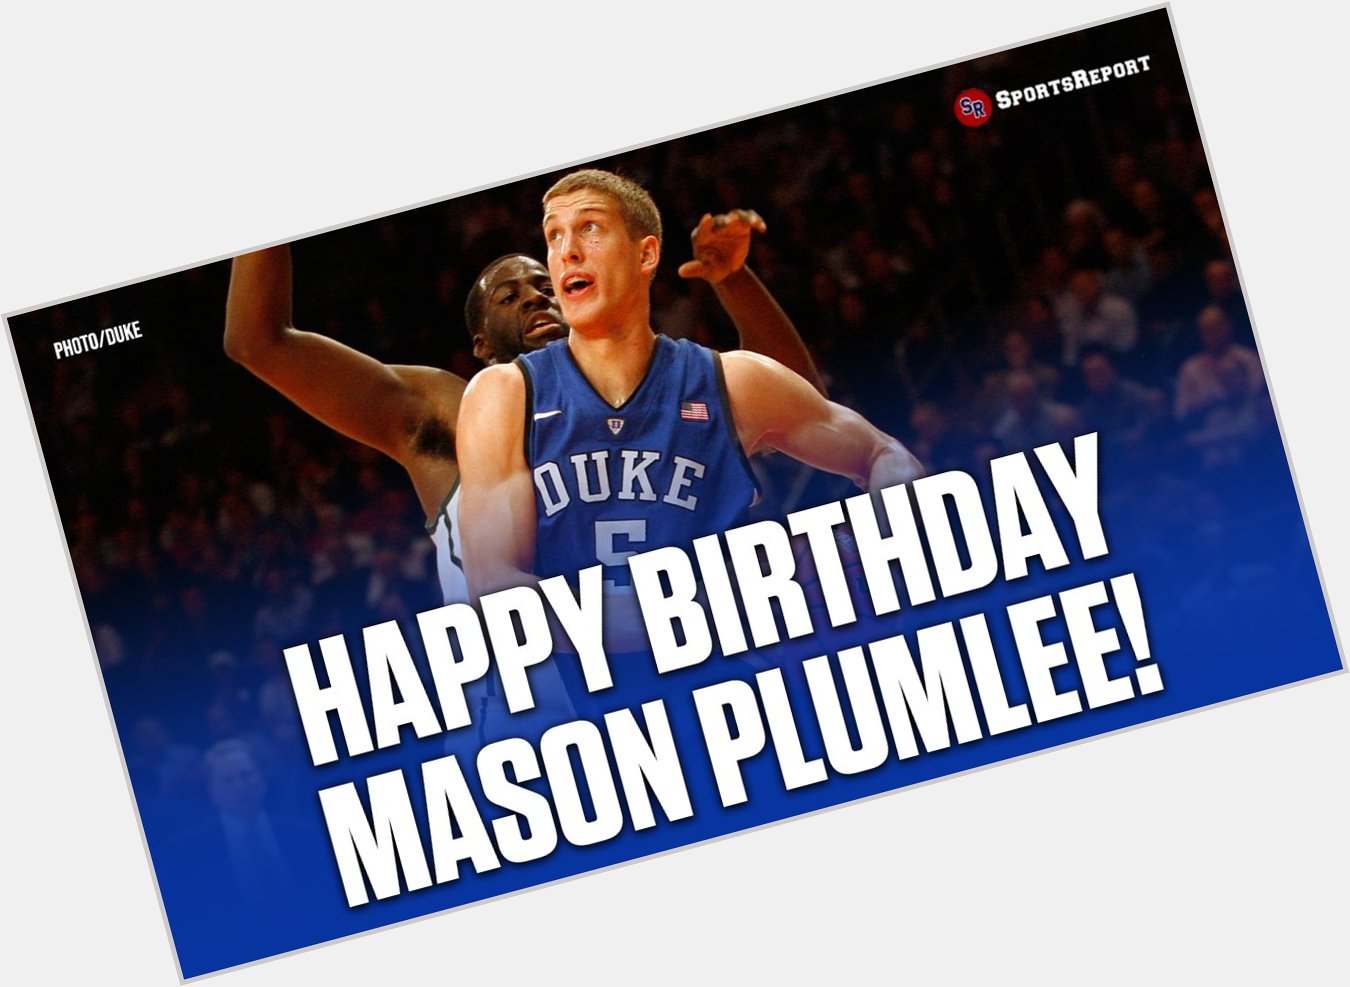  Fans, let\s wish great Mason Plumlee a Happy Birthday! 